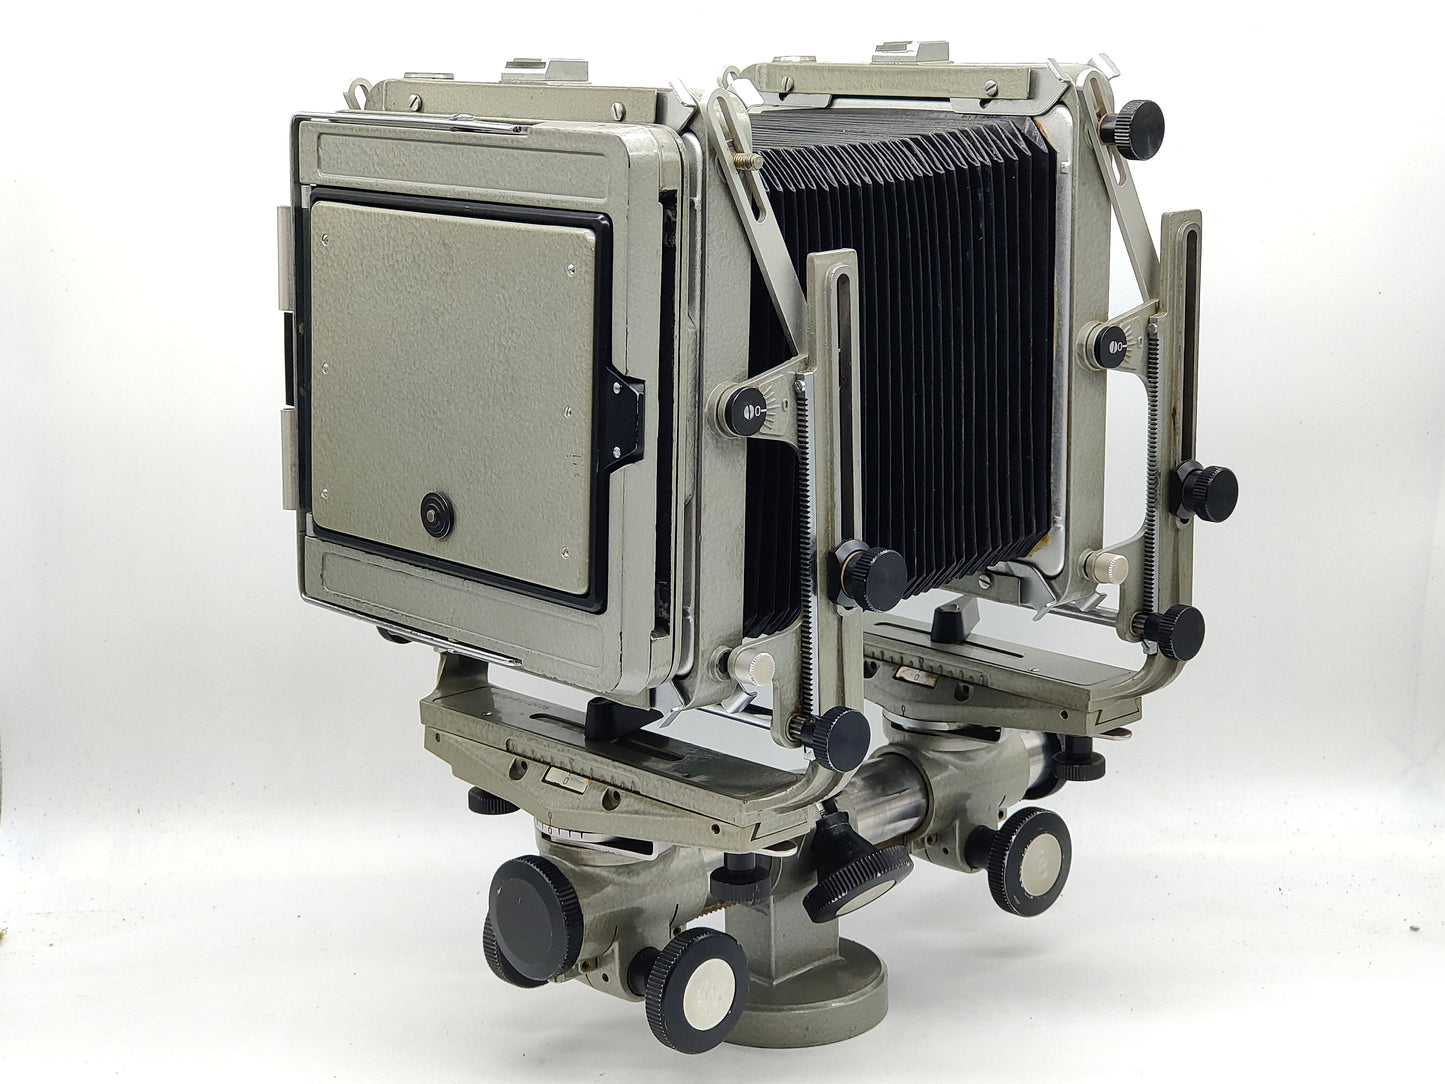 Toyo View Deluxe 4x5 large format camera with Fujinon 150mm lens